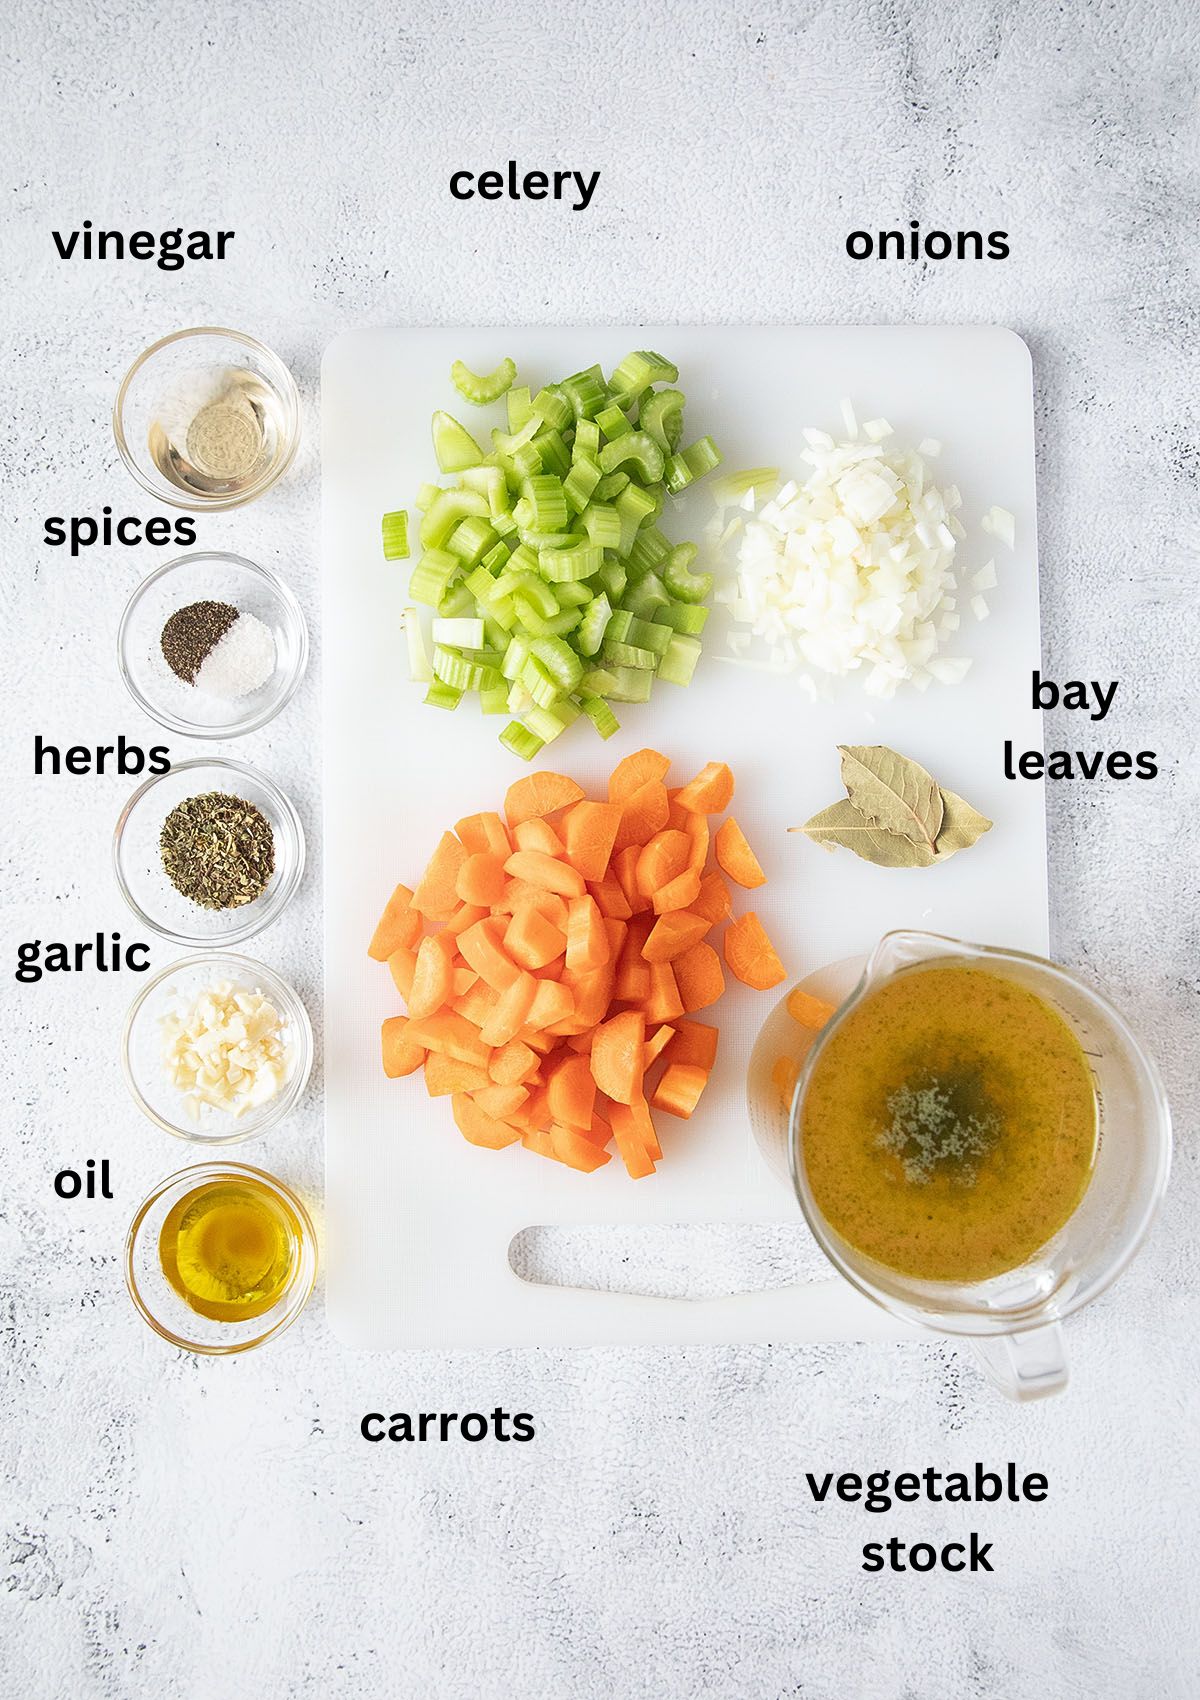 listed ingredients for making soup with carrots, celery, onion and spices on the table.